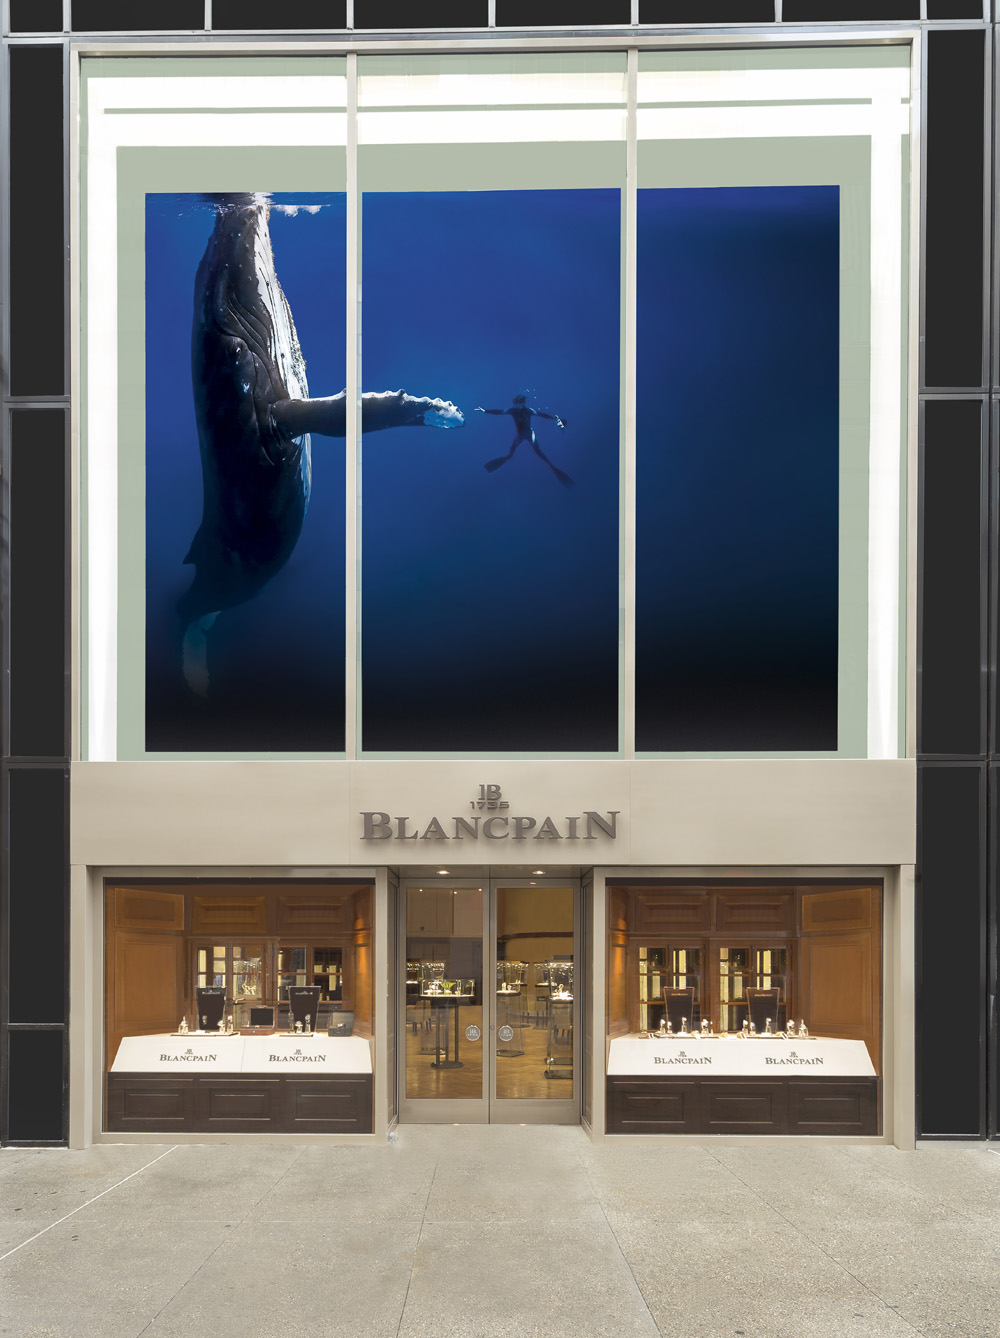 Blancpain store in the heart of Manhattan